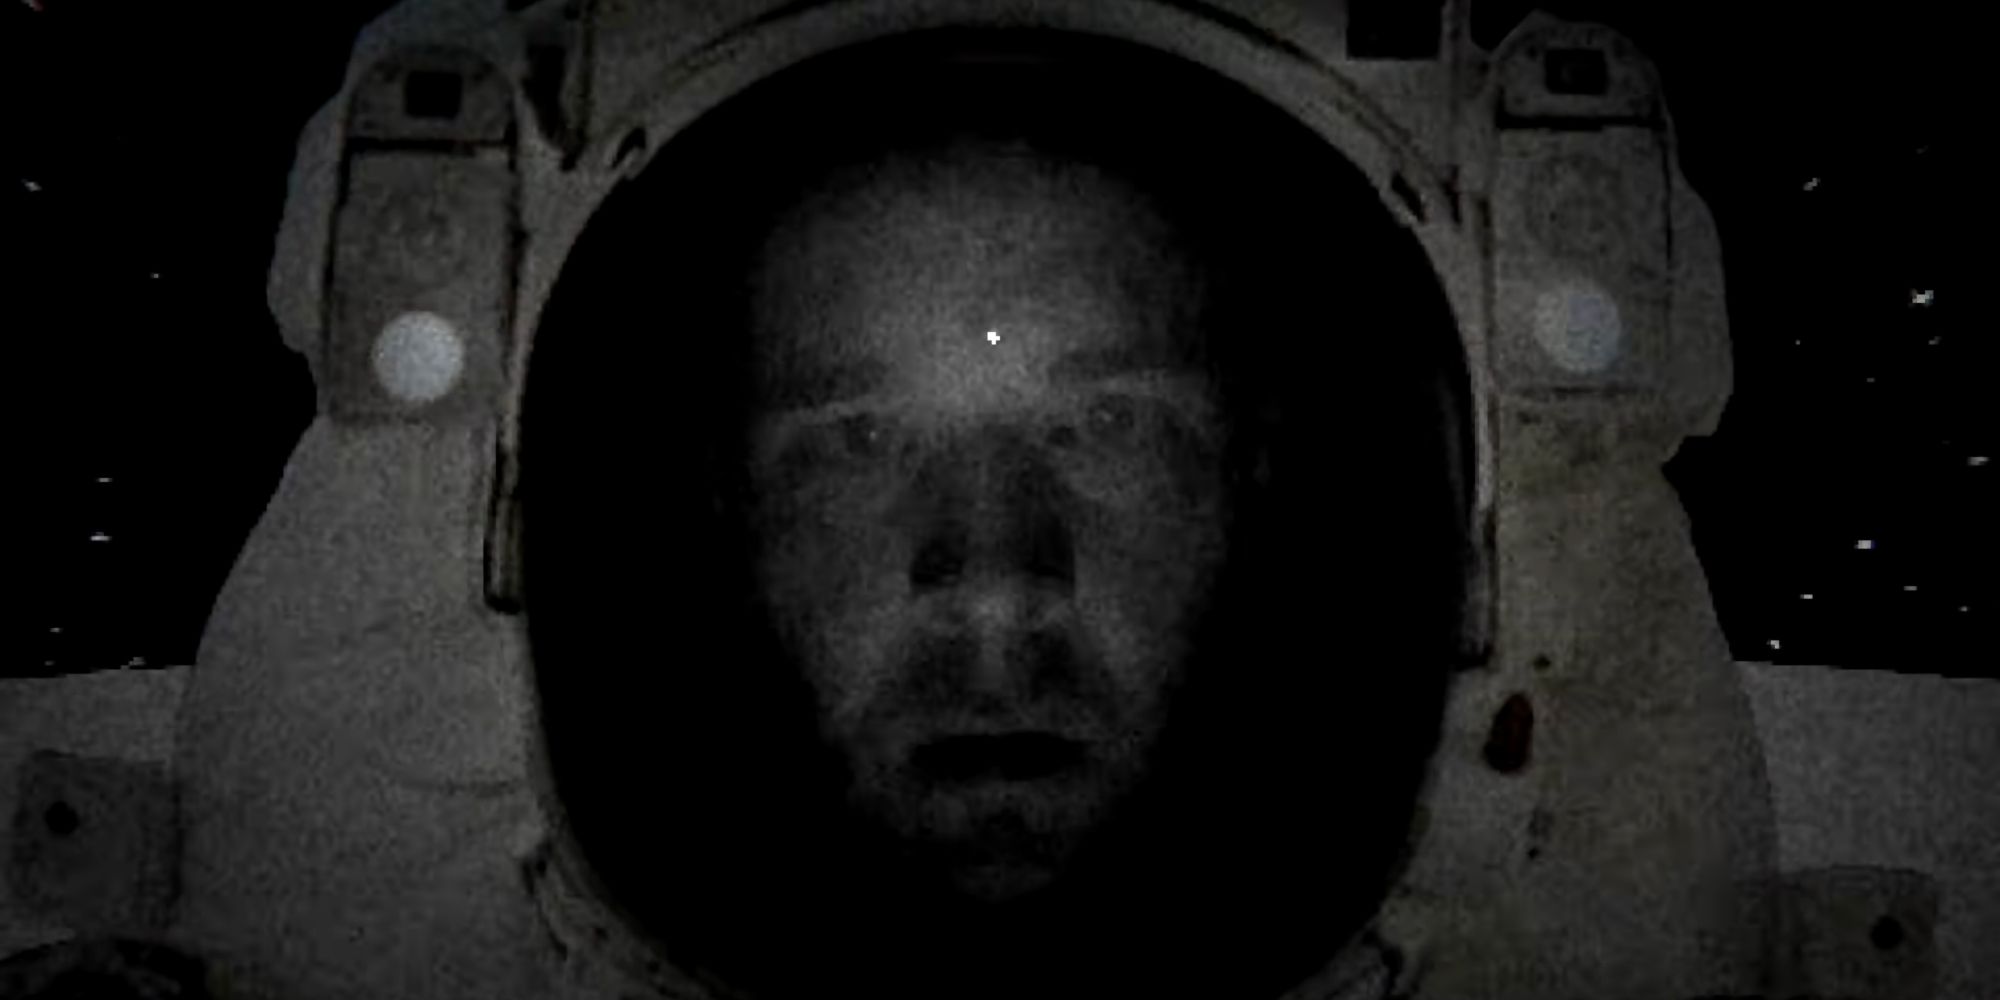 A screenshot of Solipsis, showing the main character's photorealistic face gazing out of their spacesuit in terror